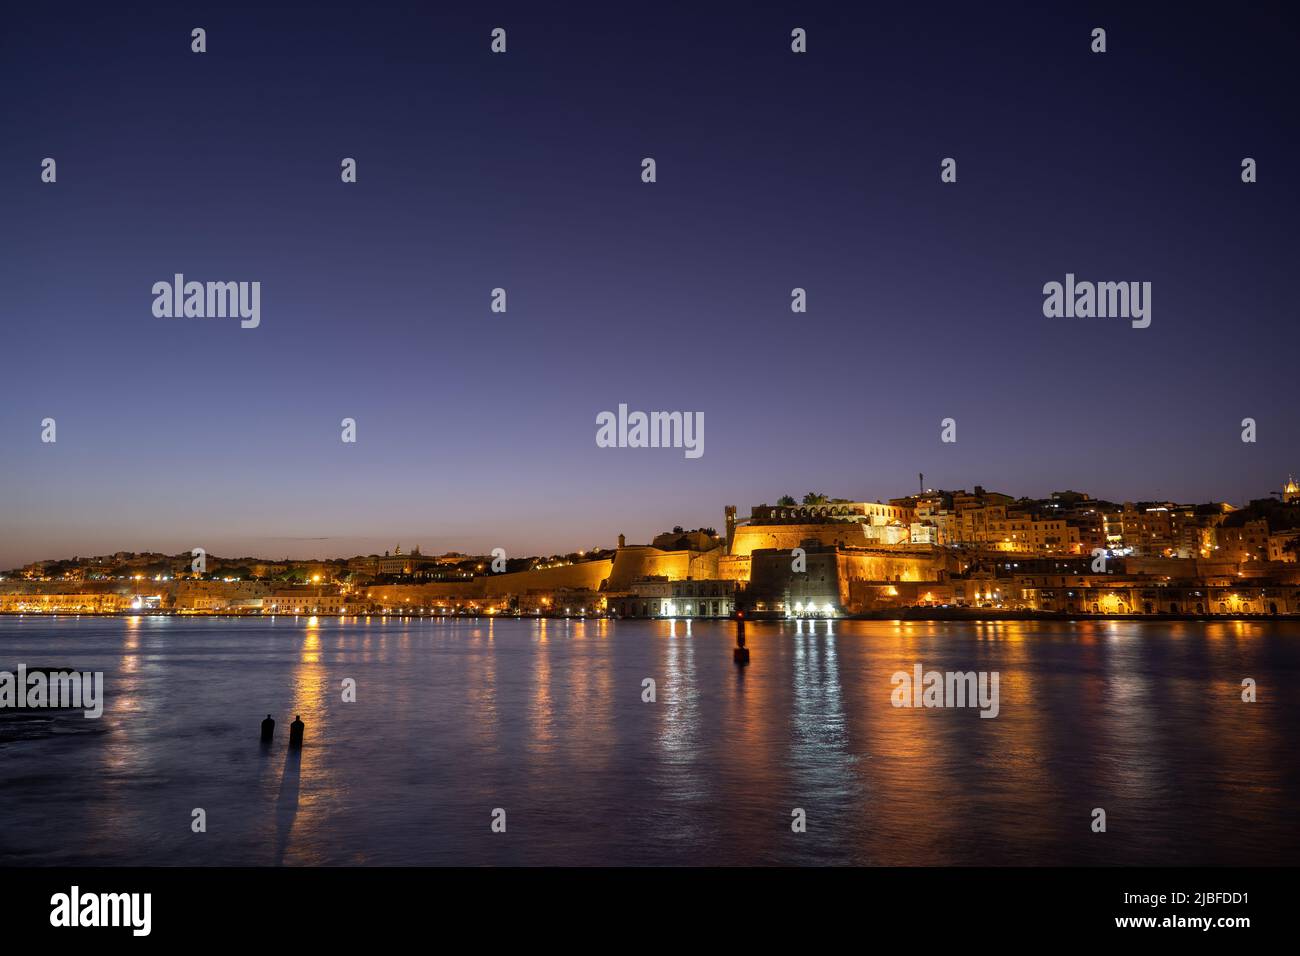 City of Valletta and Floriana town skyline in Malta at night, view from the Grand Harbour. Stock Photo